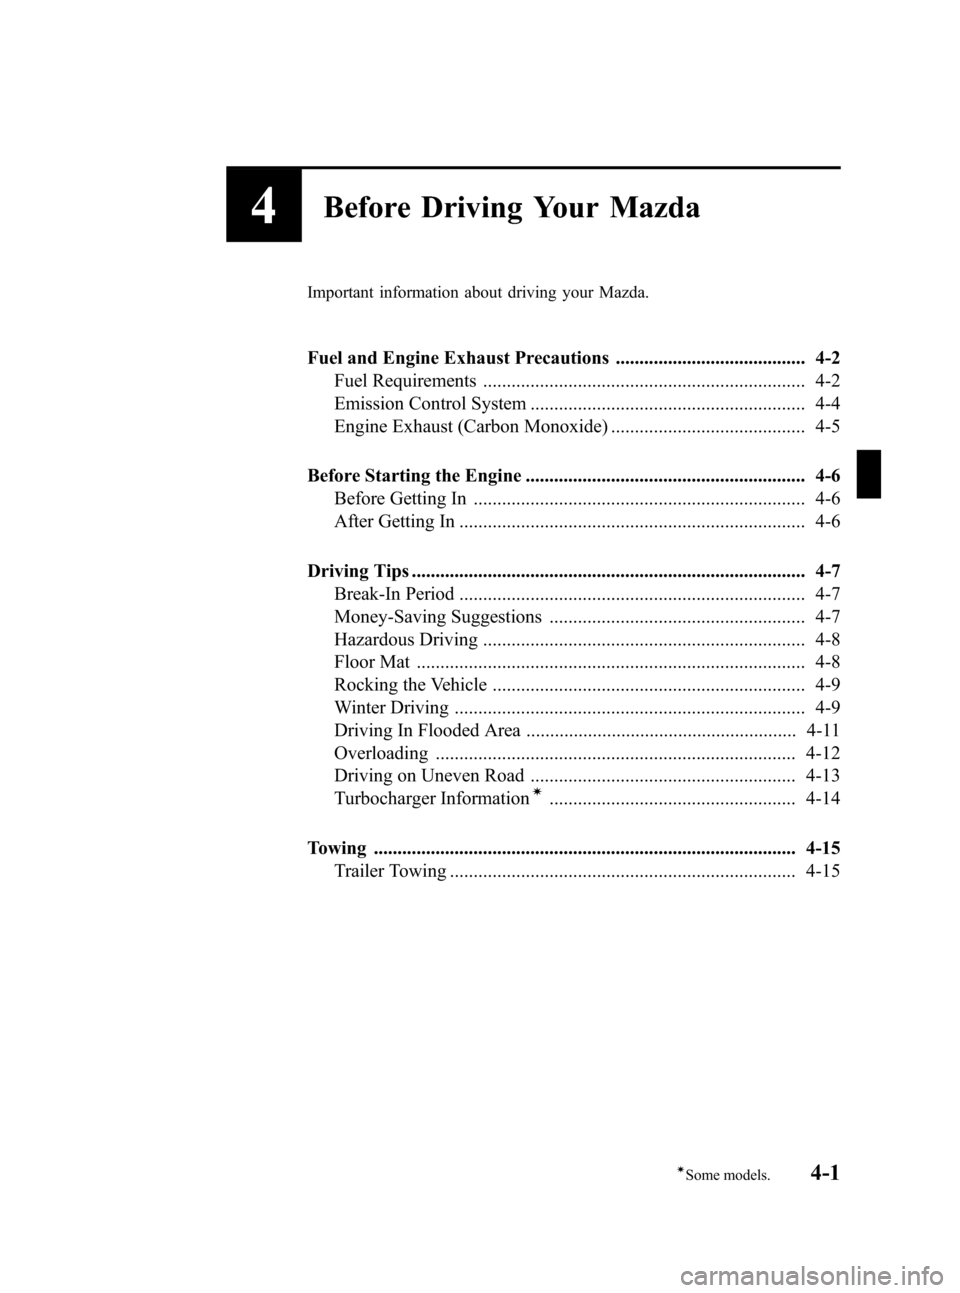 MAZDA MODEL 3 HATCHBACK 2011  Owners Manual (in English) Black plate (145,1)
4Before Driving Your Mazda
Important information about driving your Mazda.
Fuel and Engine Exhaust Precautions ........................................ 4-2Fuel Requirements .......